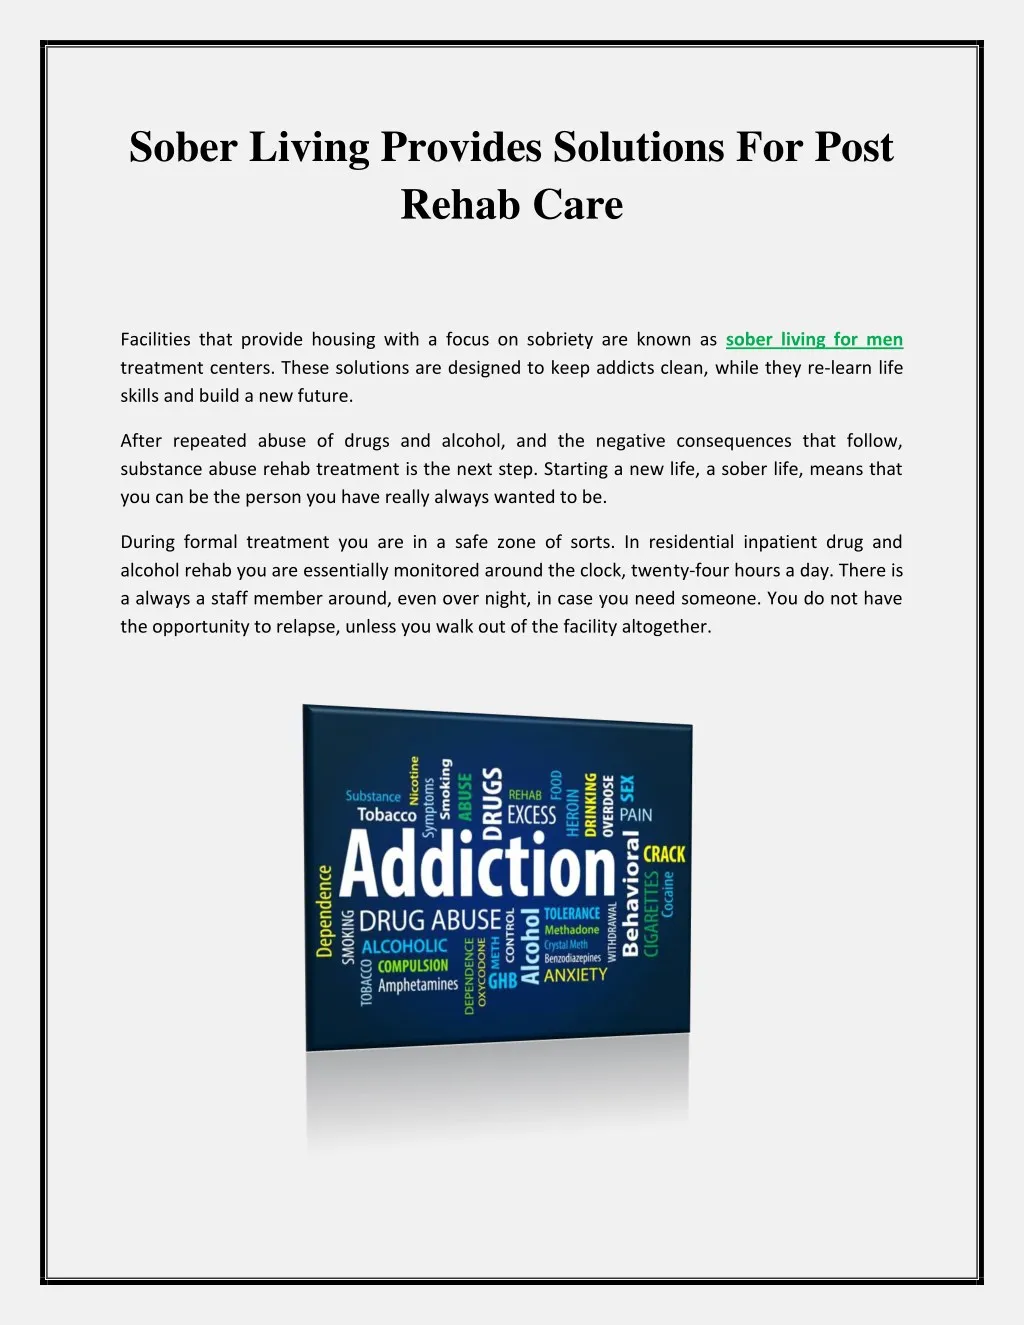 sober living provides solutions for post rehab